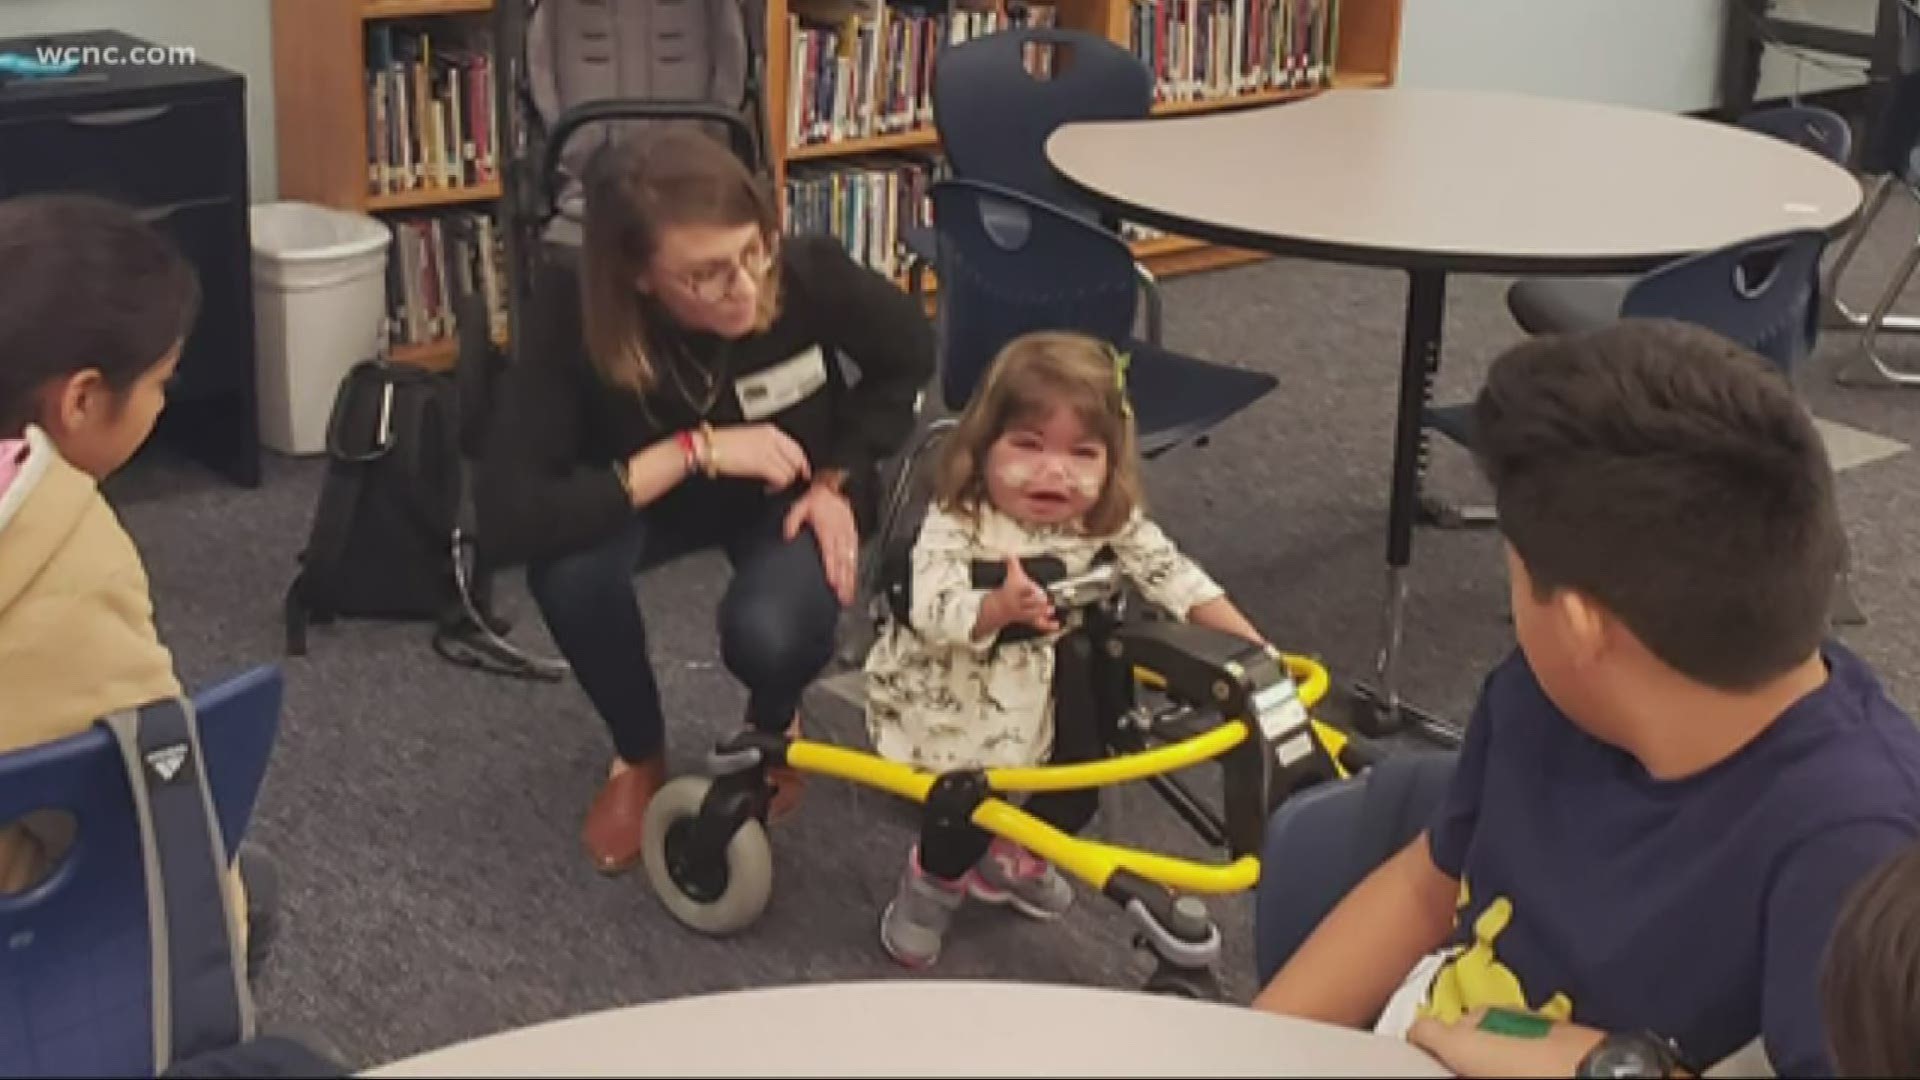 As part of project 'Lead the Way,' students were tasked with helping a 2-year-old who was born with a genetic disorder.